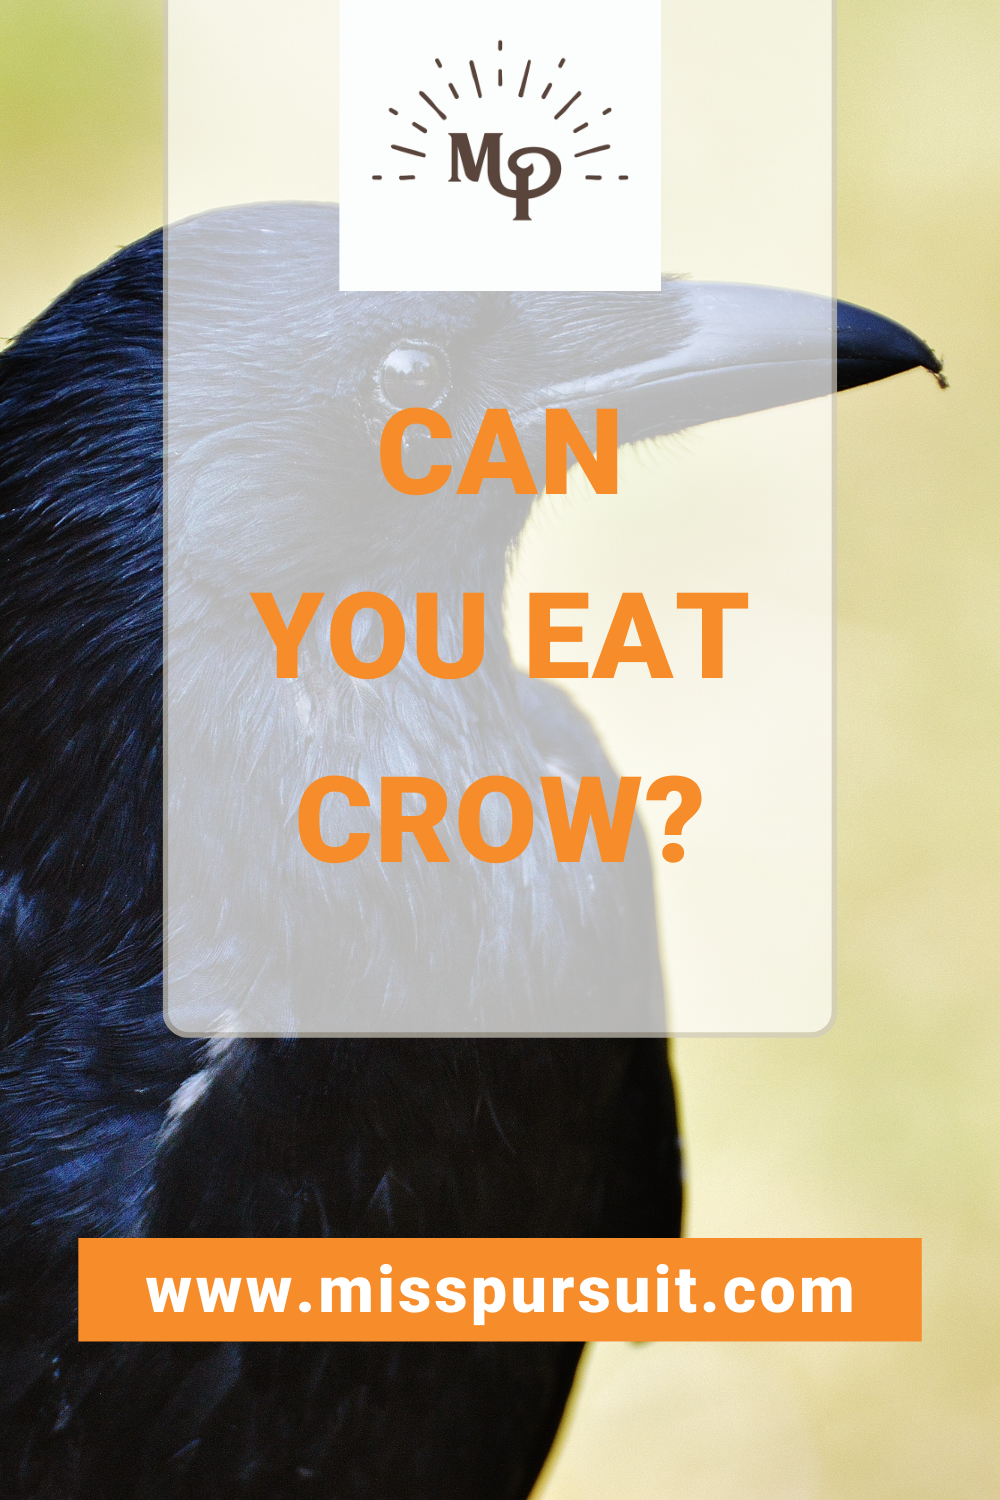 Can You Eat Crow? Exploring the Origins and Usage of the Phrase